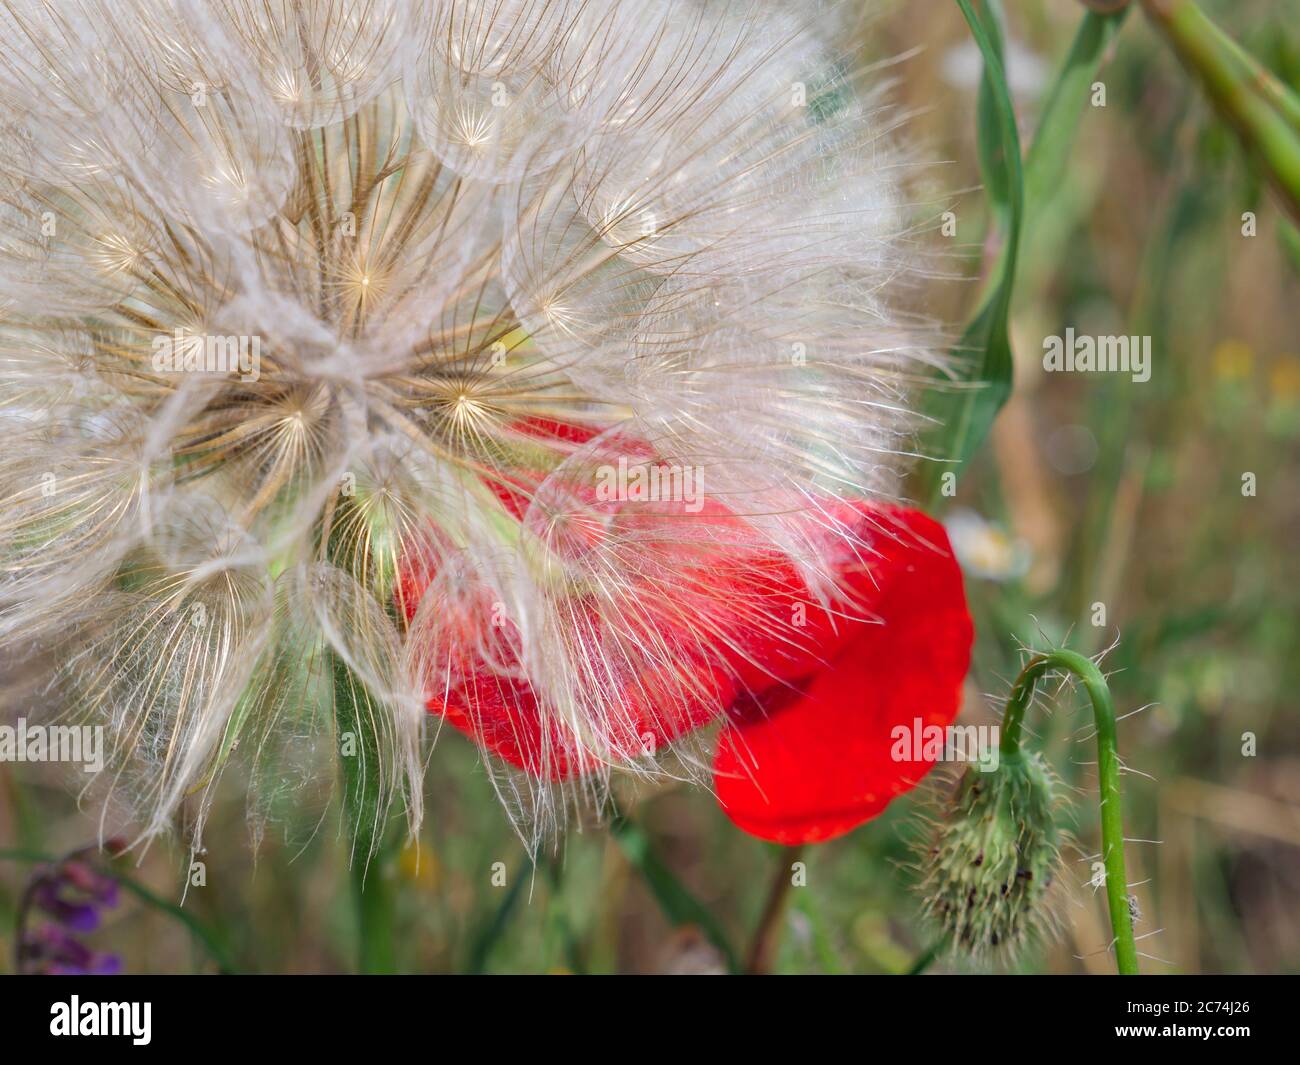 Closeup of a big goats beard flower (Tragopogon pratensis) and red poppy flower behind it growing in a meadow in the countryside. Stock Photo